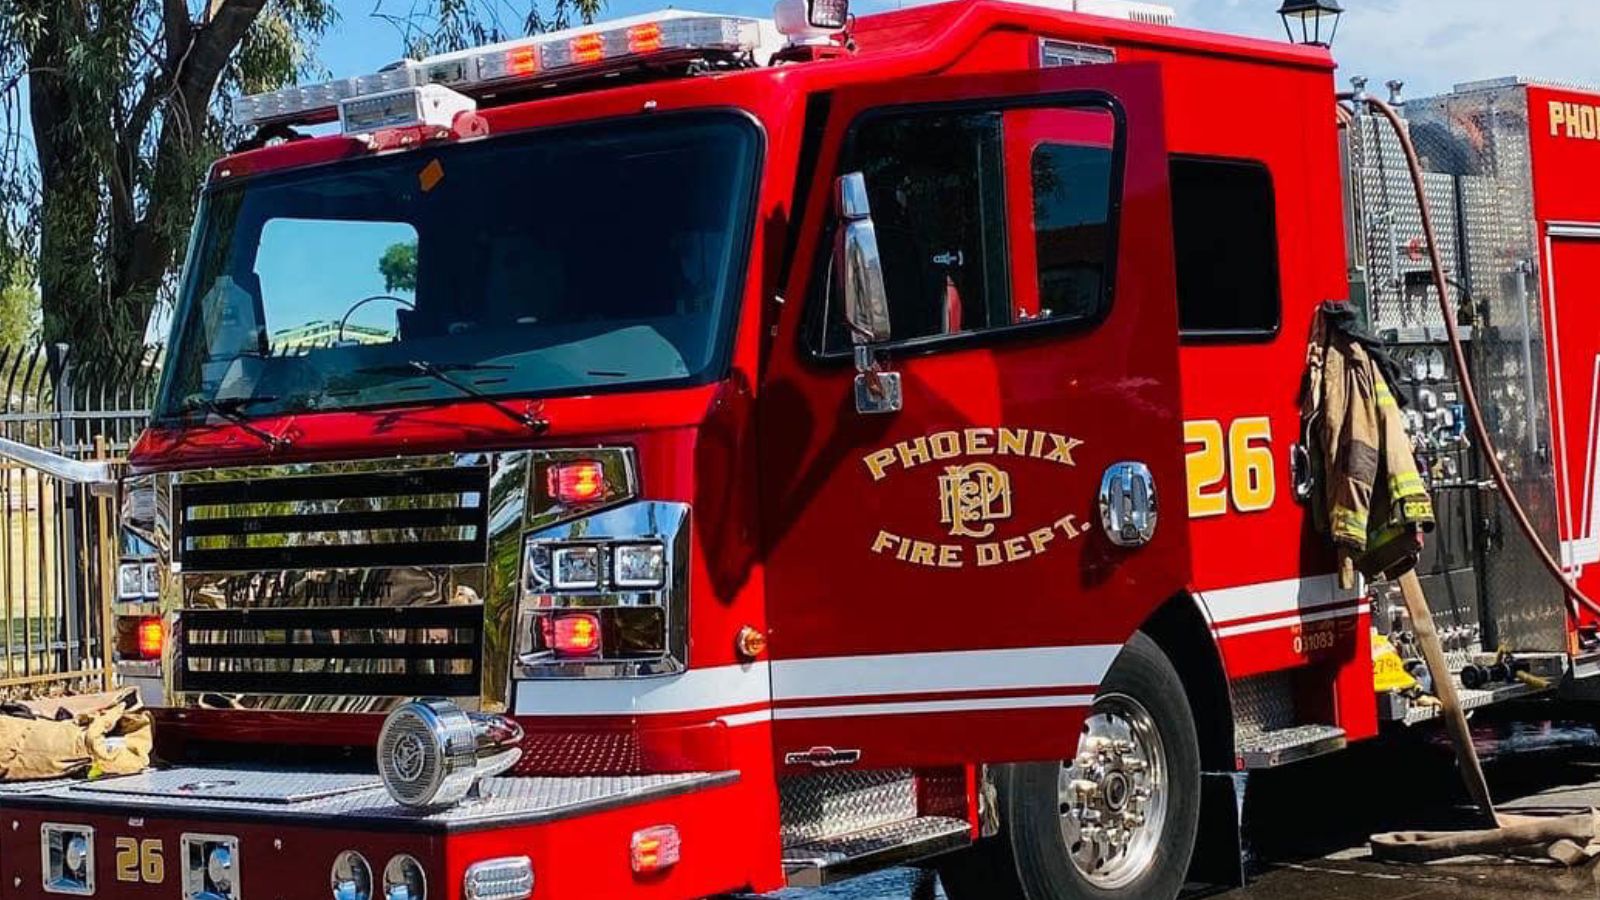 Firefighter was brought to hospital, Phoenix Fire Department says...